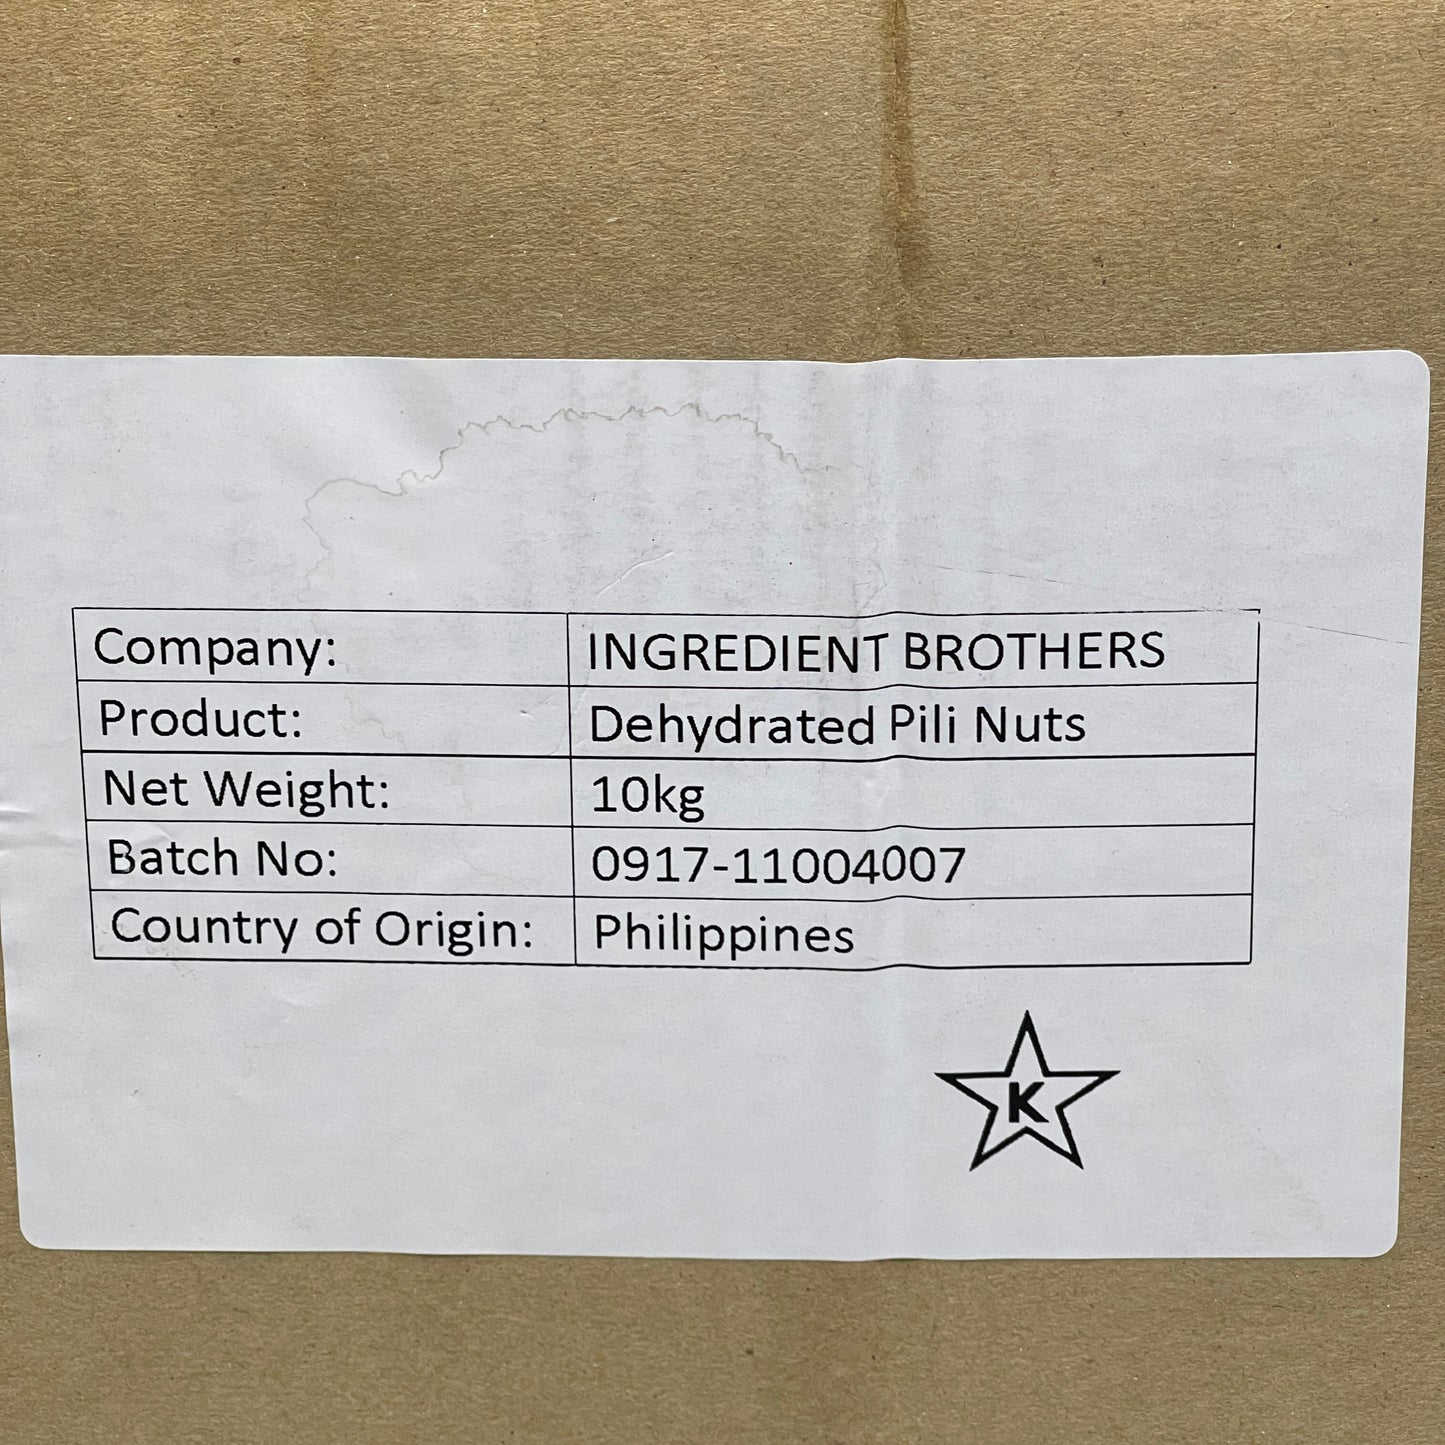 INGREDIENT BROTHERS (22 Pounds) Dehydrated Pili Nuts 10kg